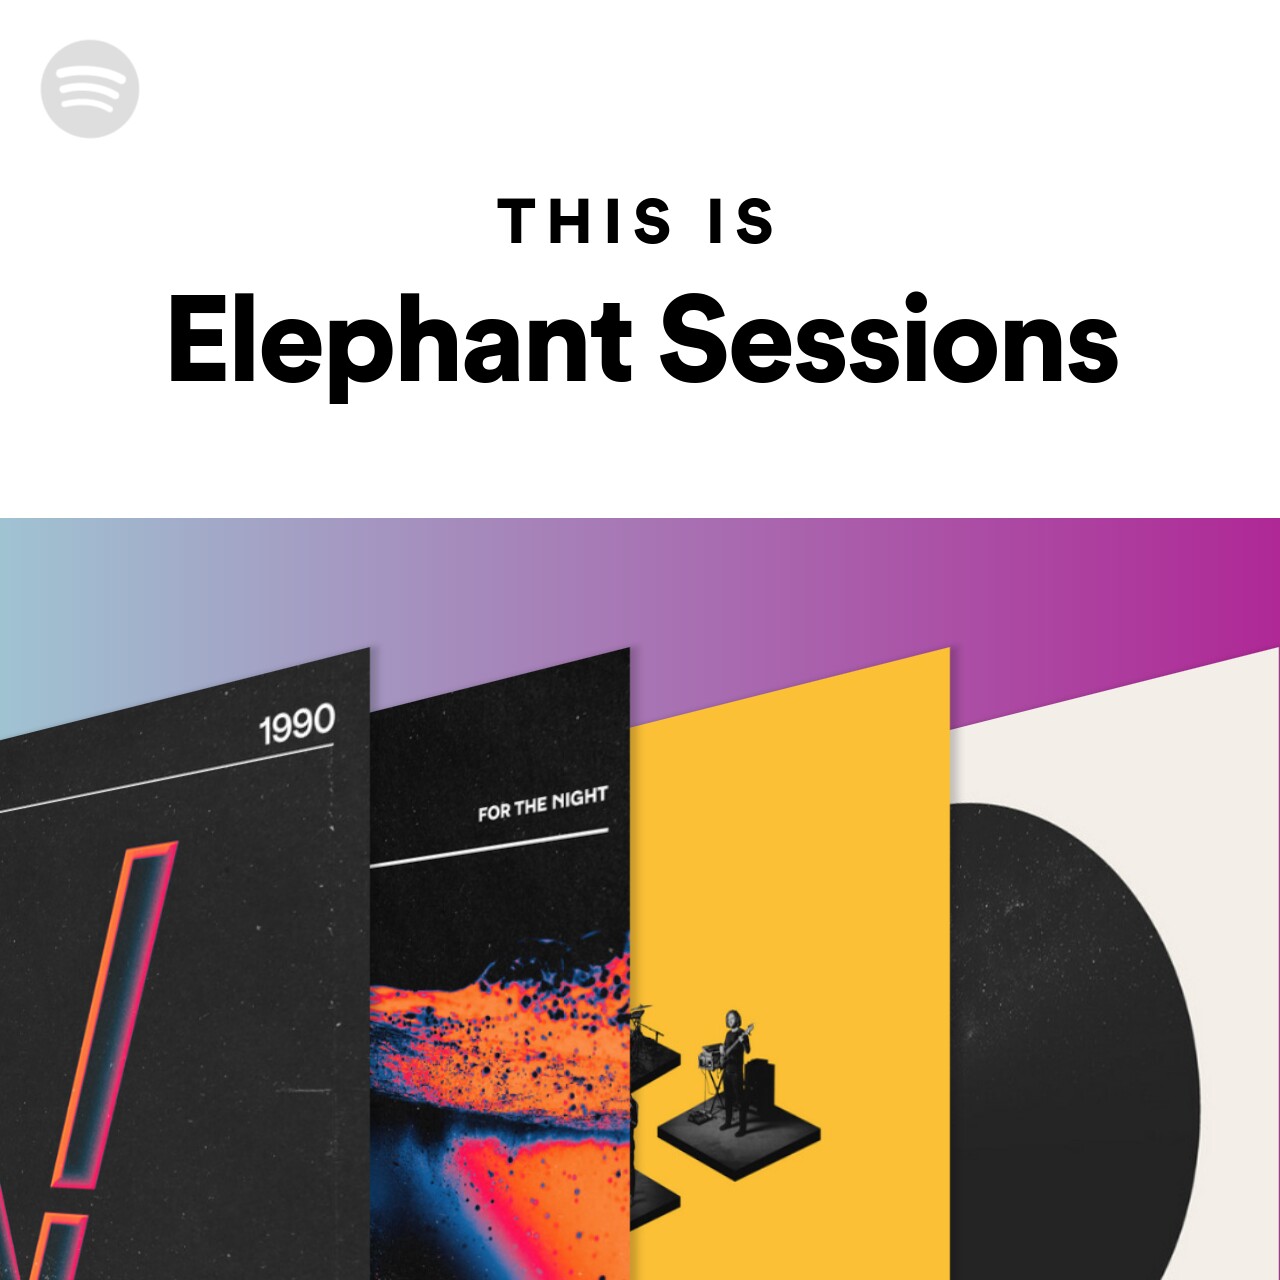 This Is Elephant Sessions